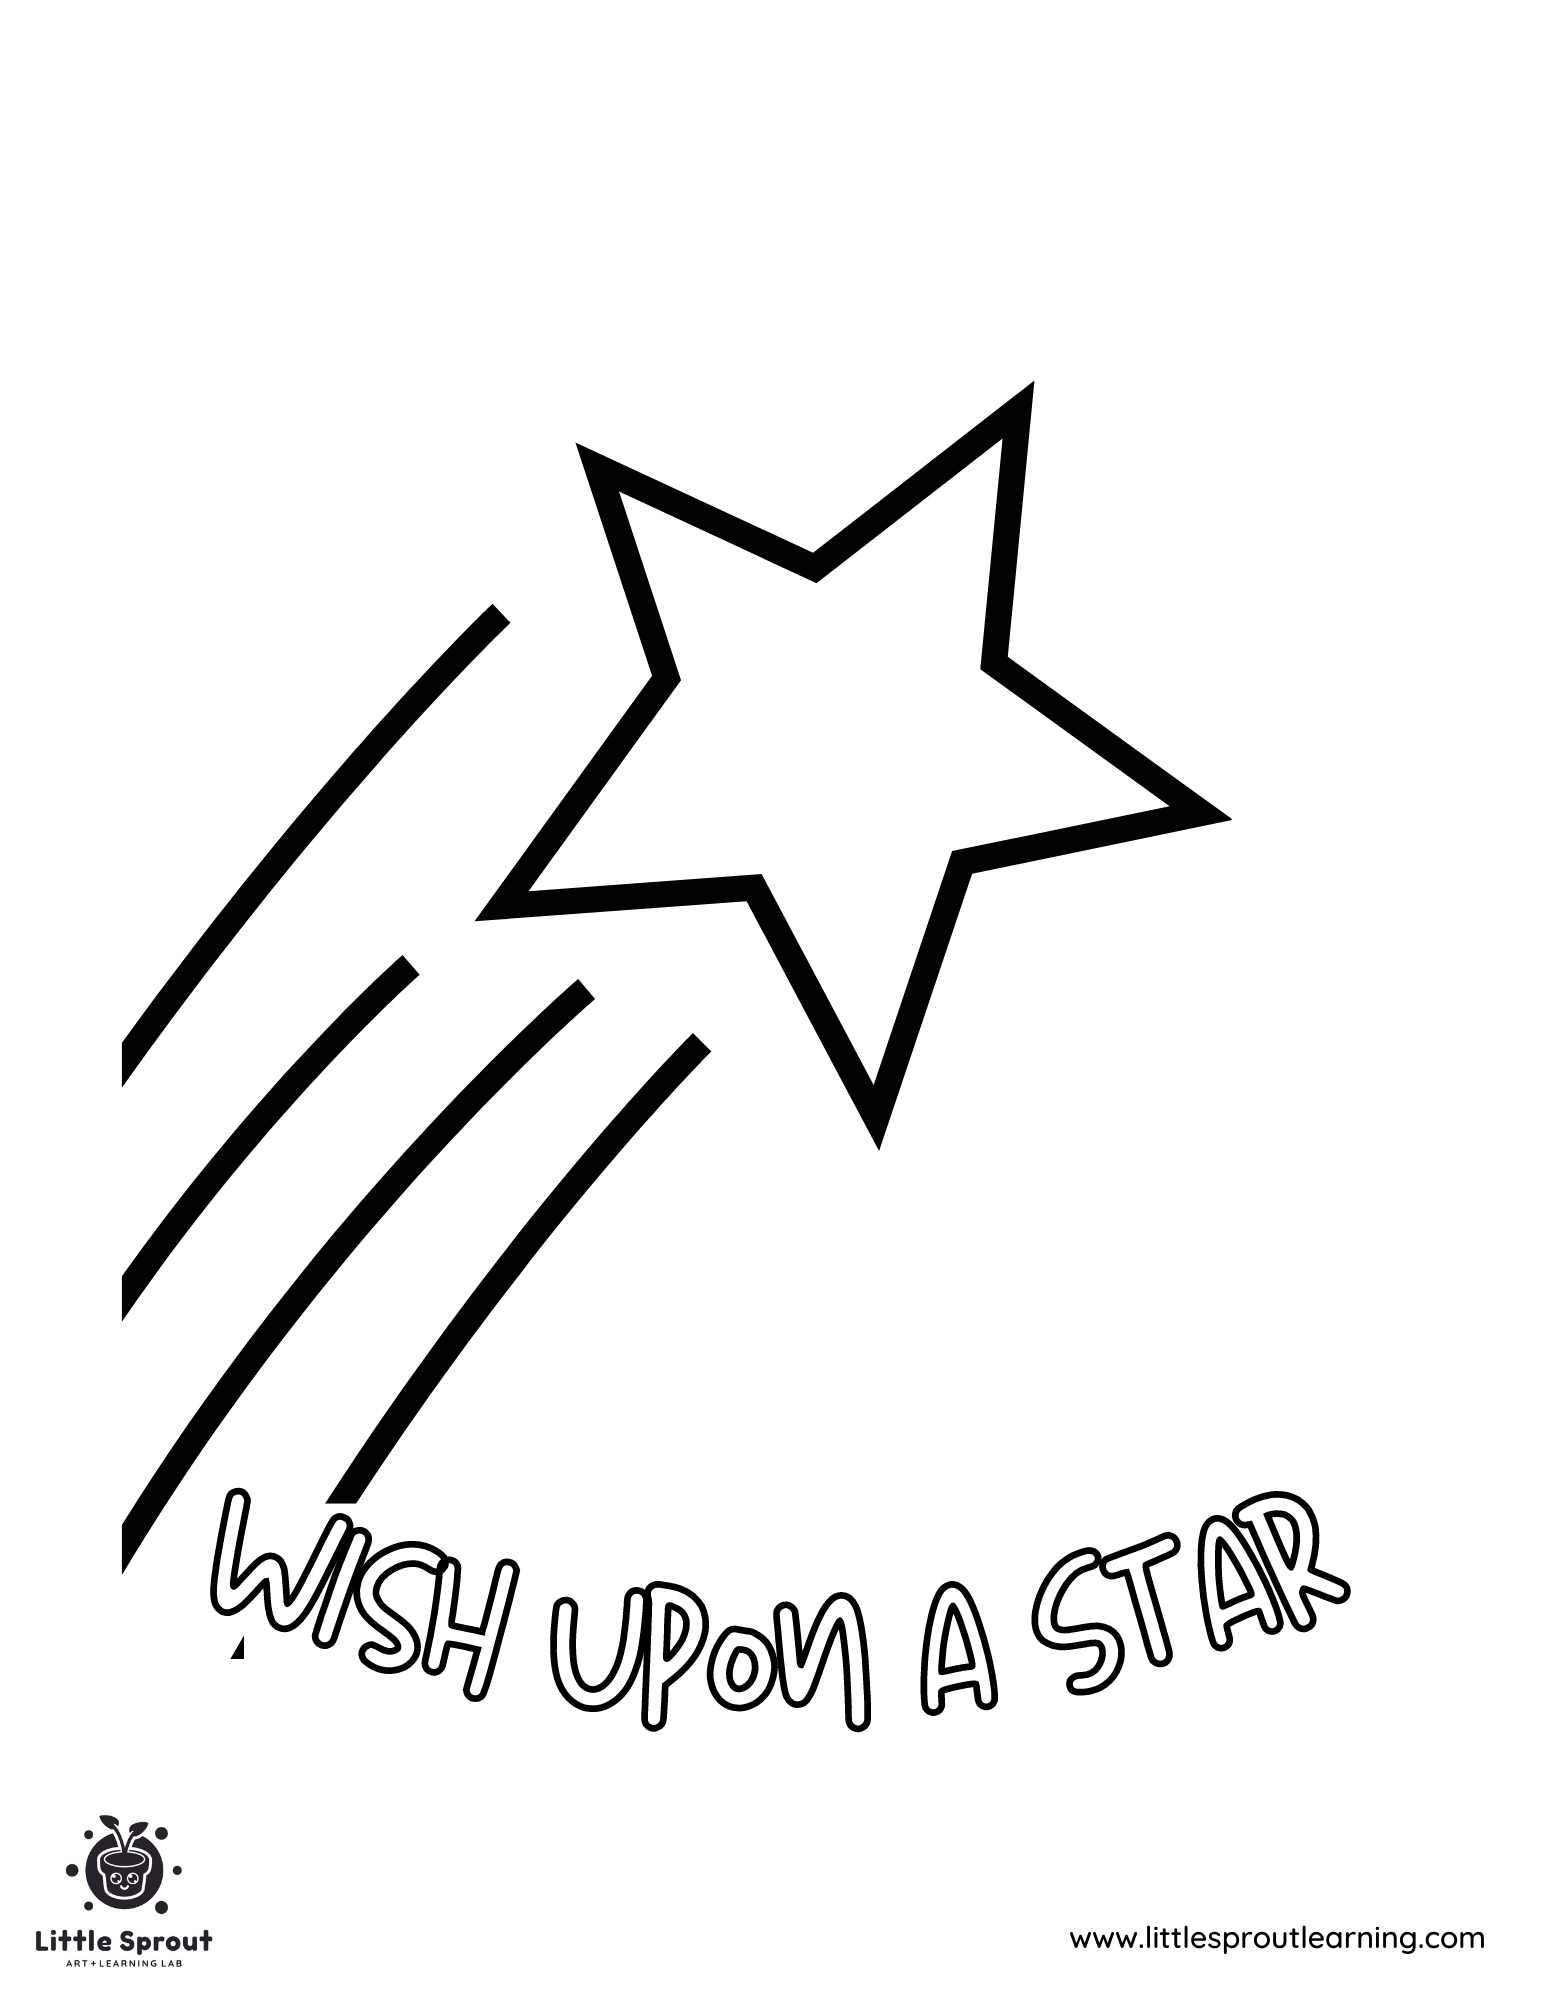 Wish Upon a Star Coloring Page